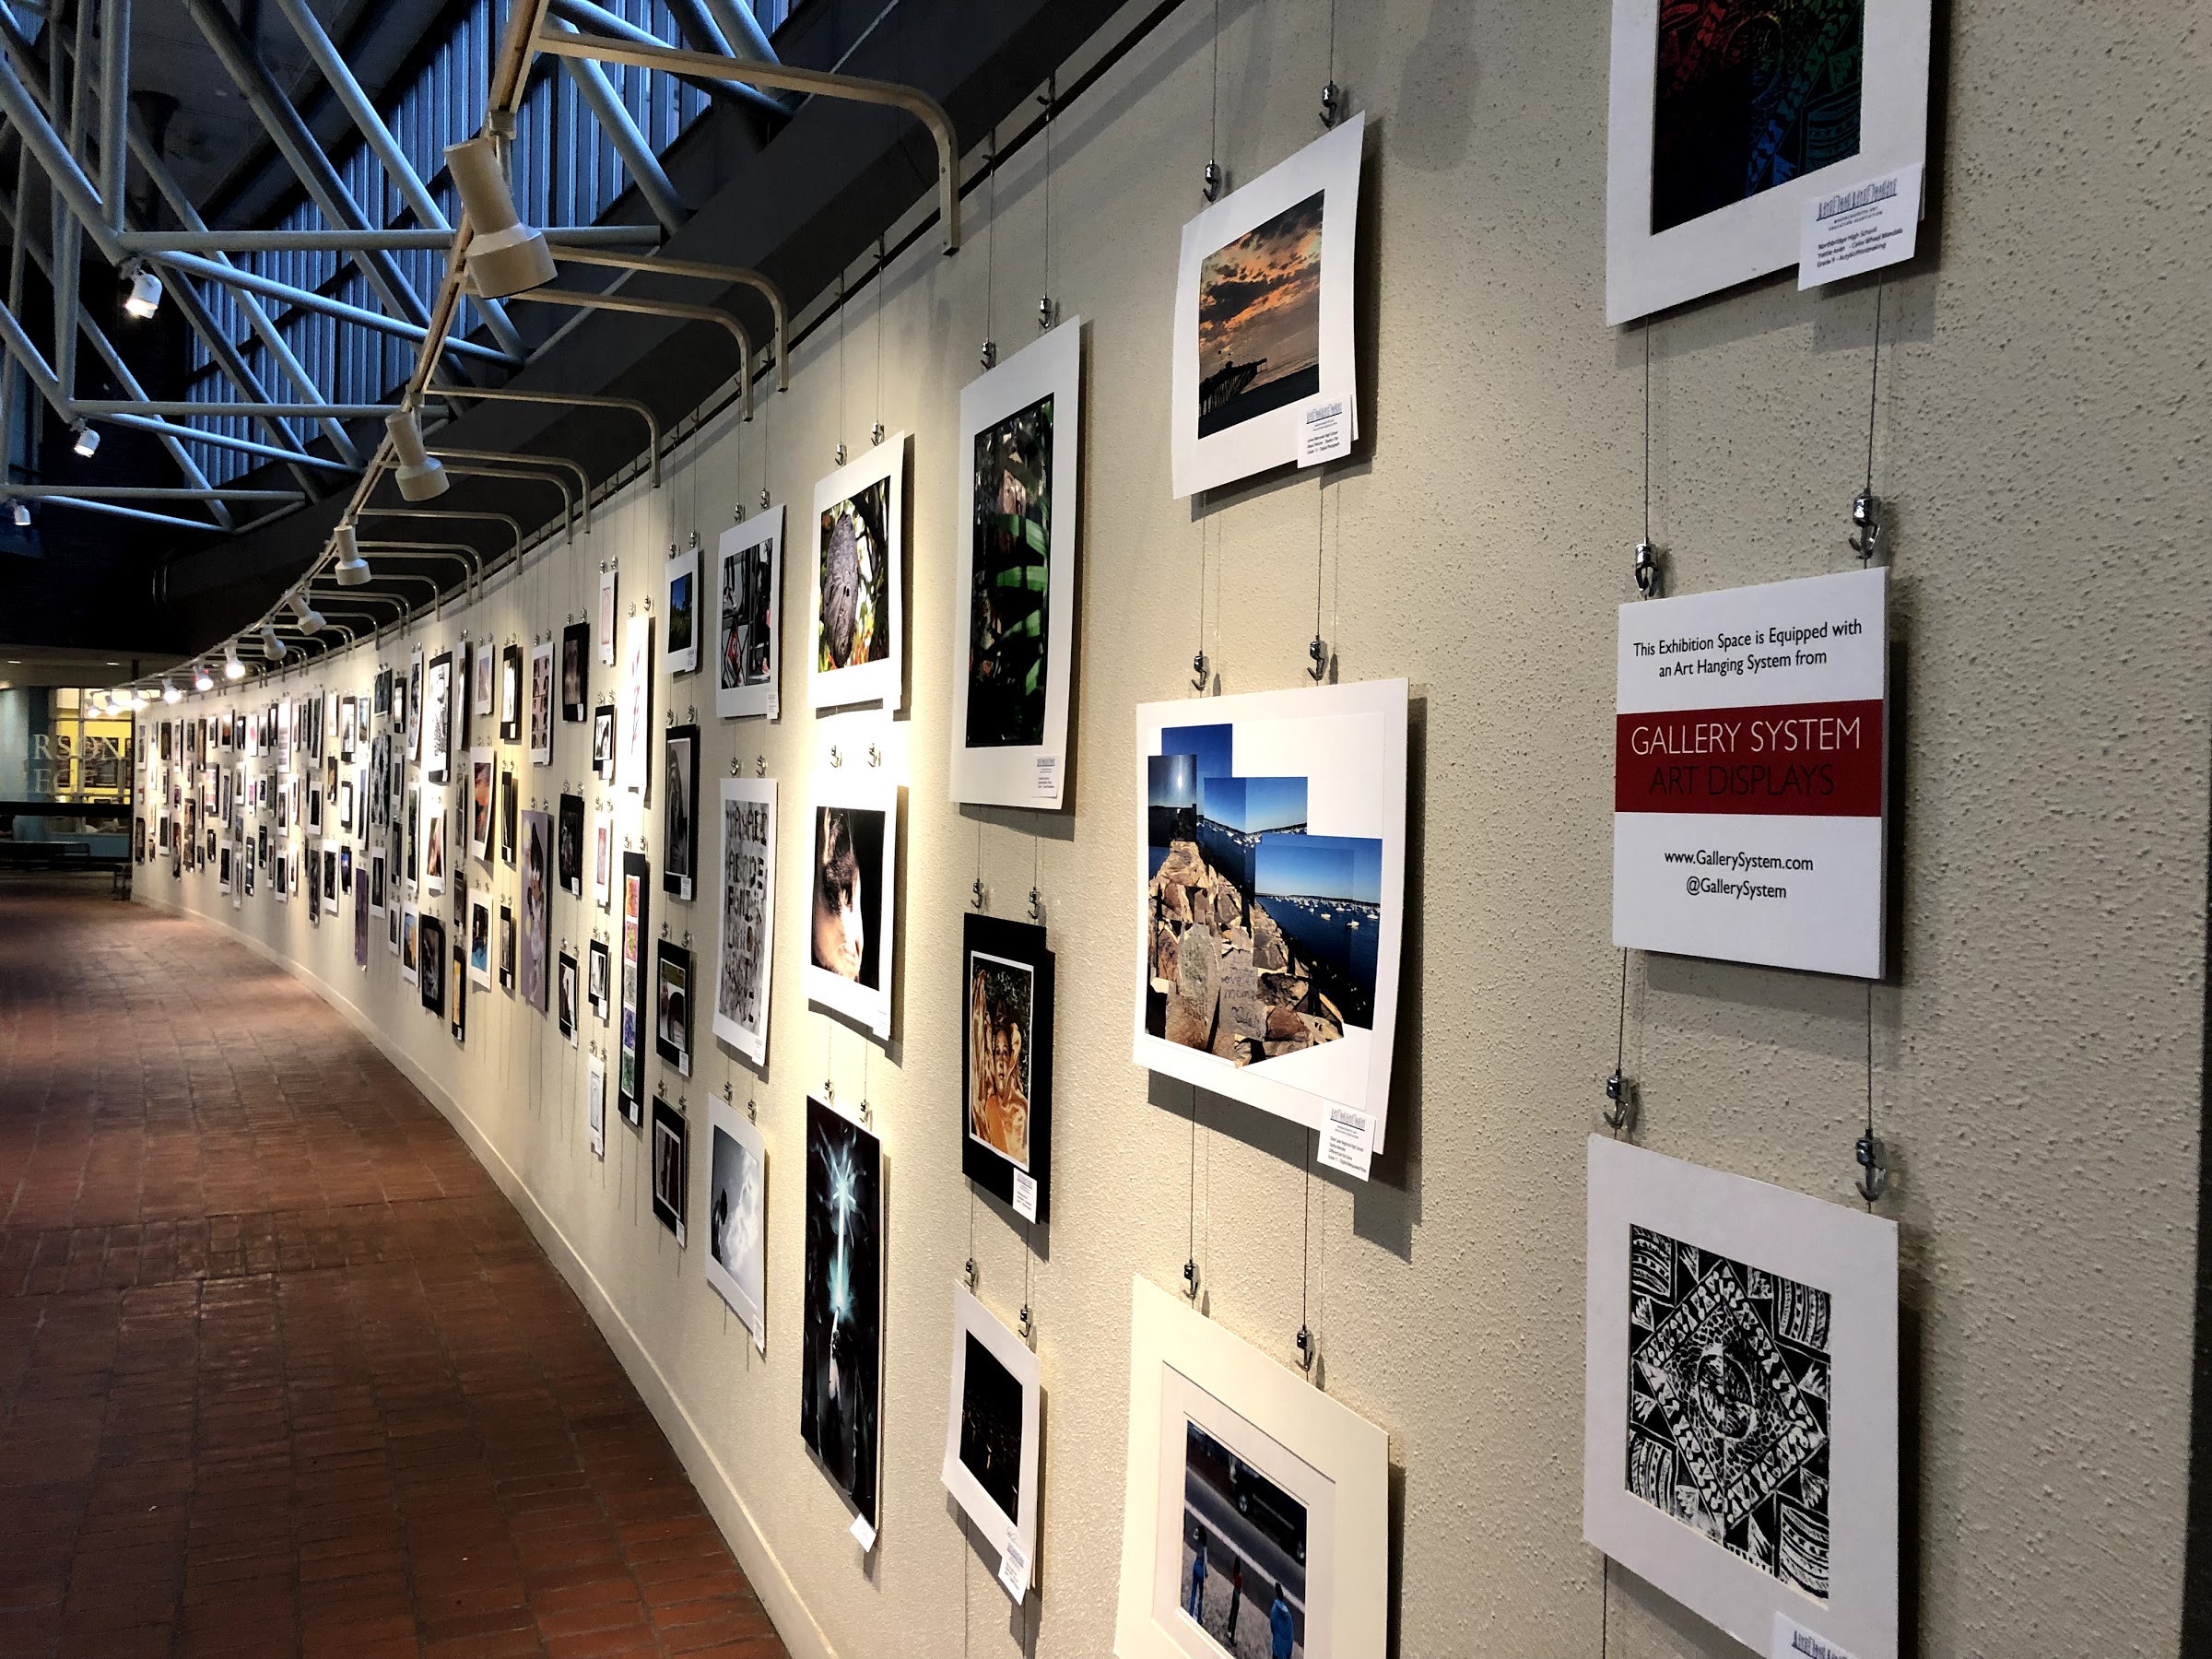 Student artworks displayed in public building using picture hanging system